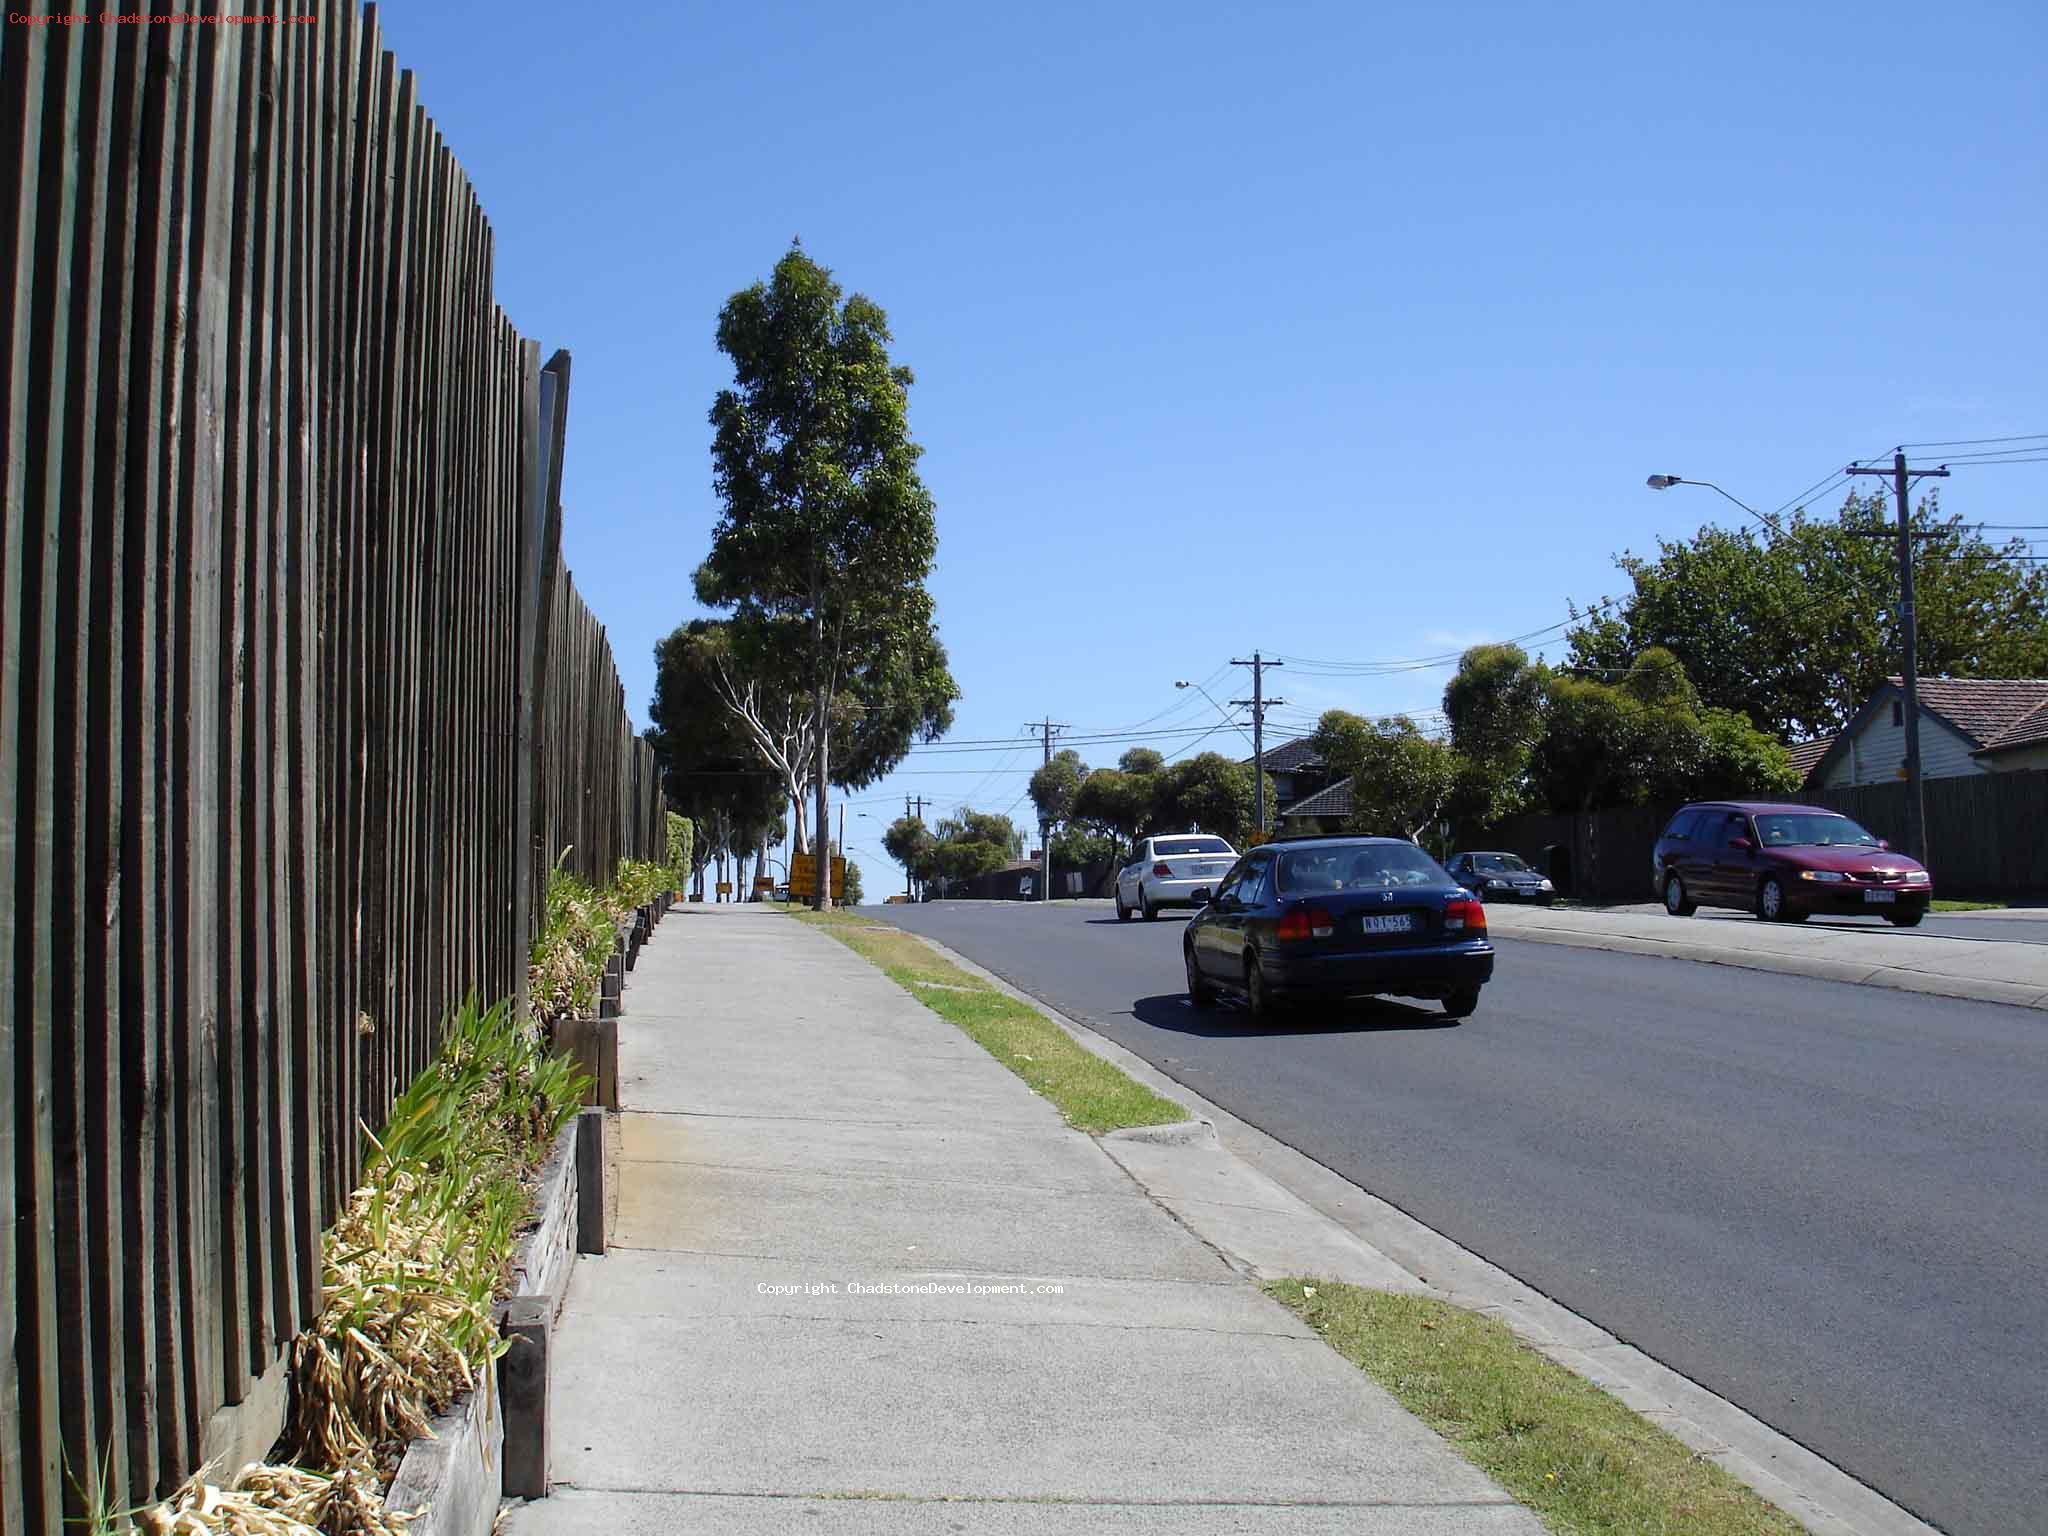 Middle Road, looking towards the Centre - Chadstone Development Discussions